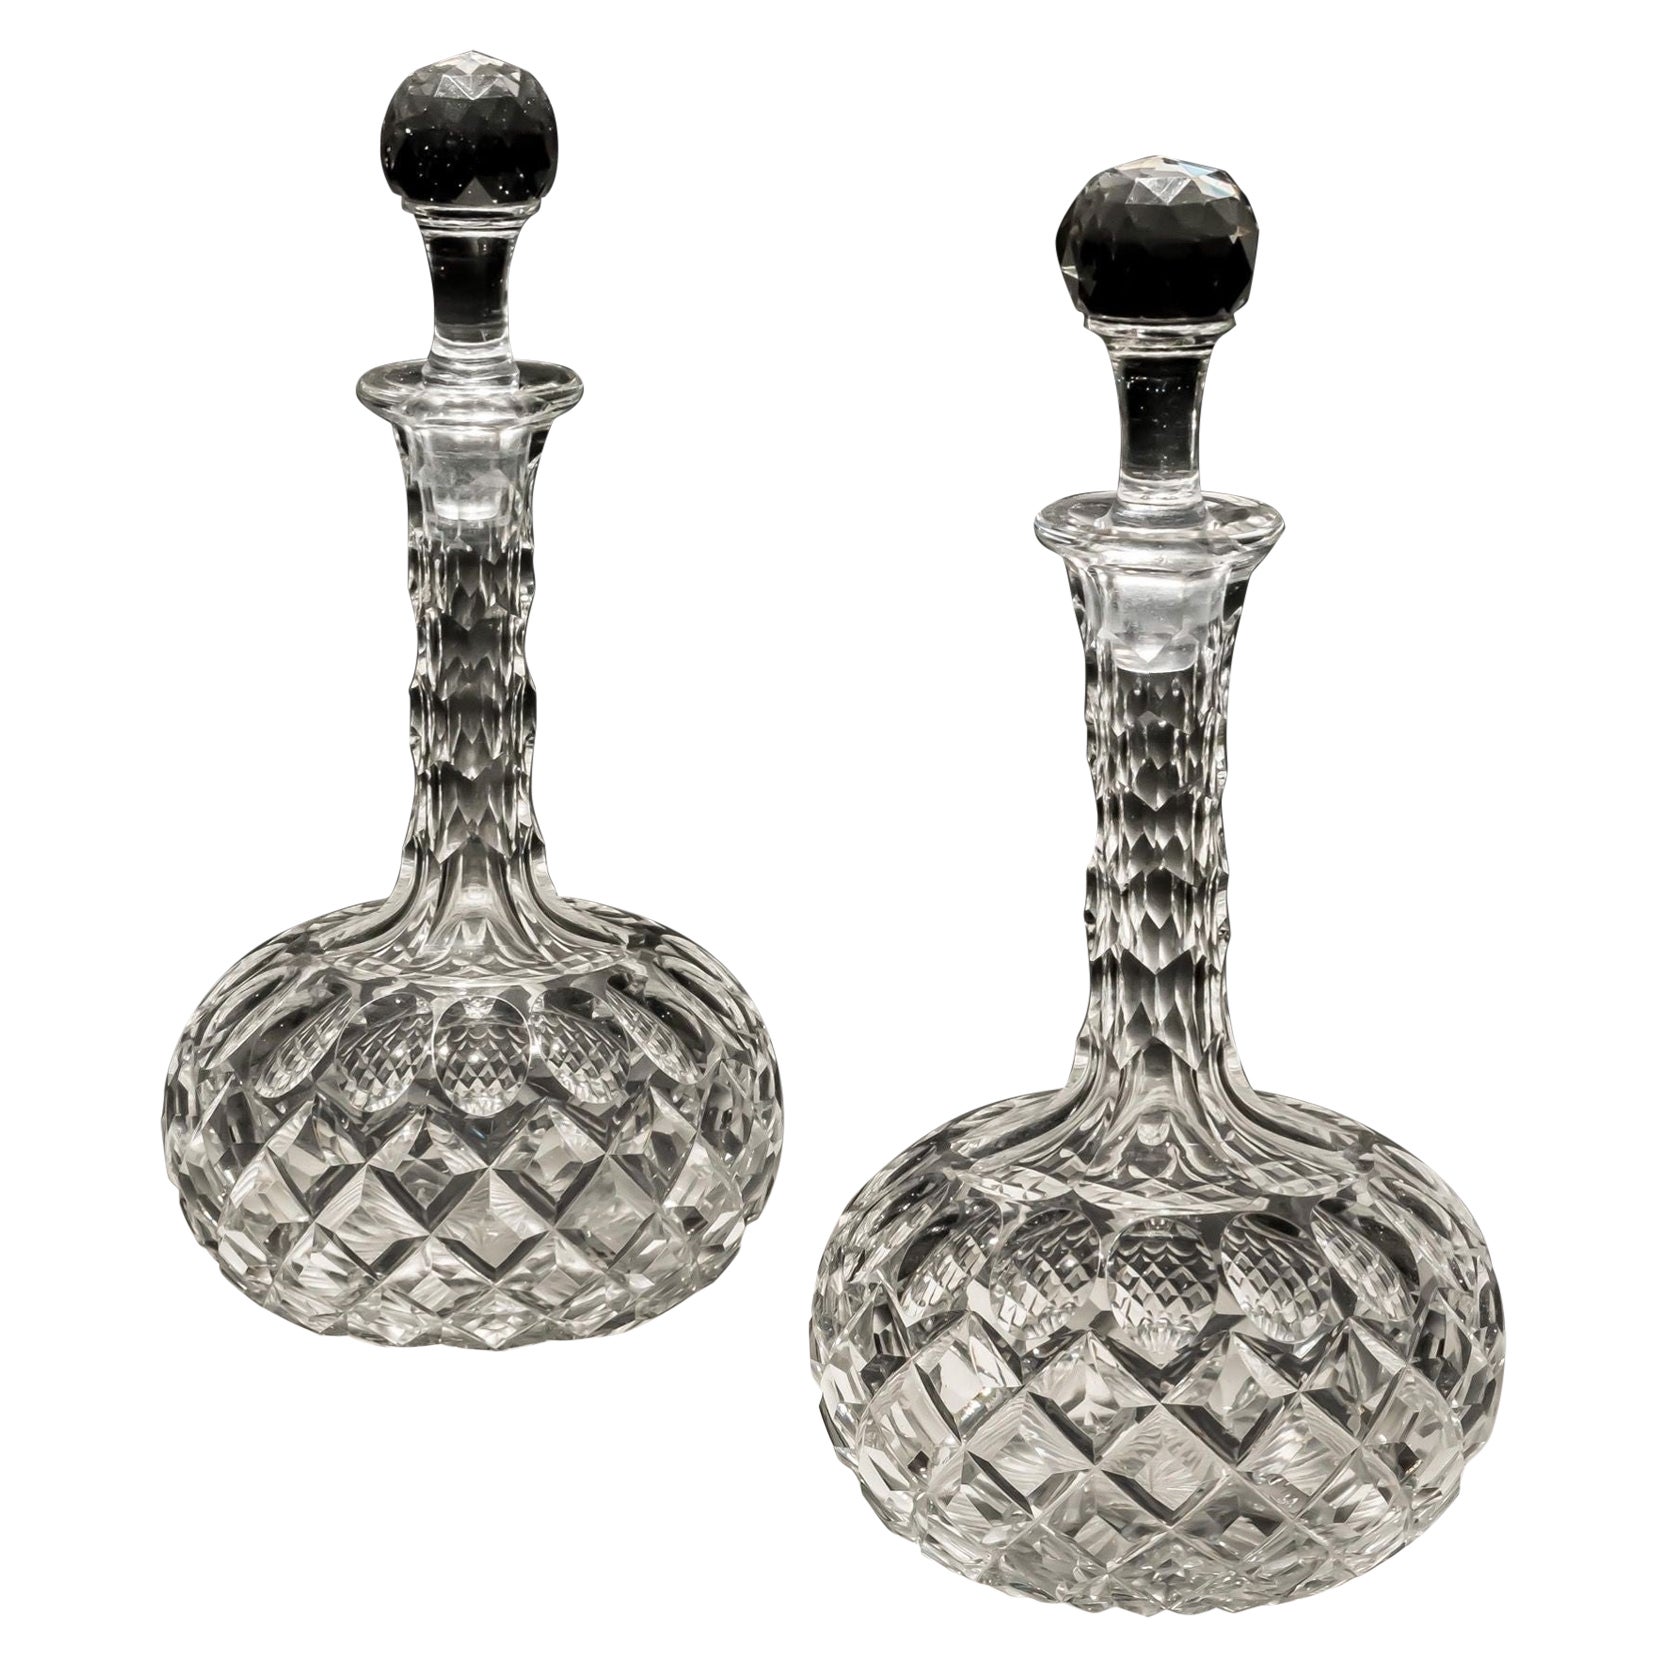 A pair of shaft and globe Victorian decanters For Sale